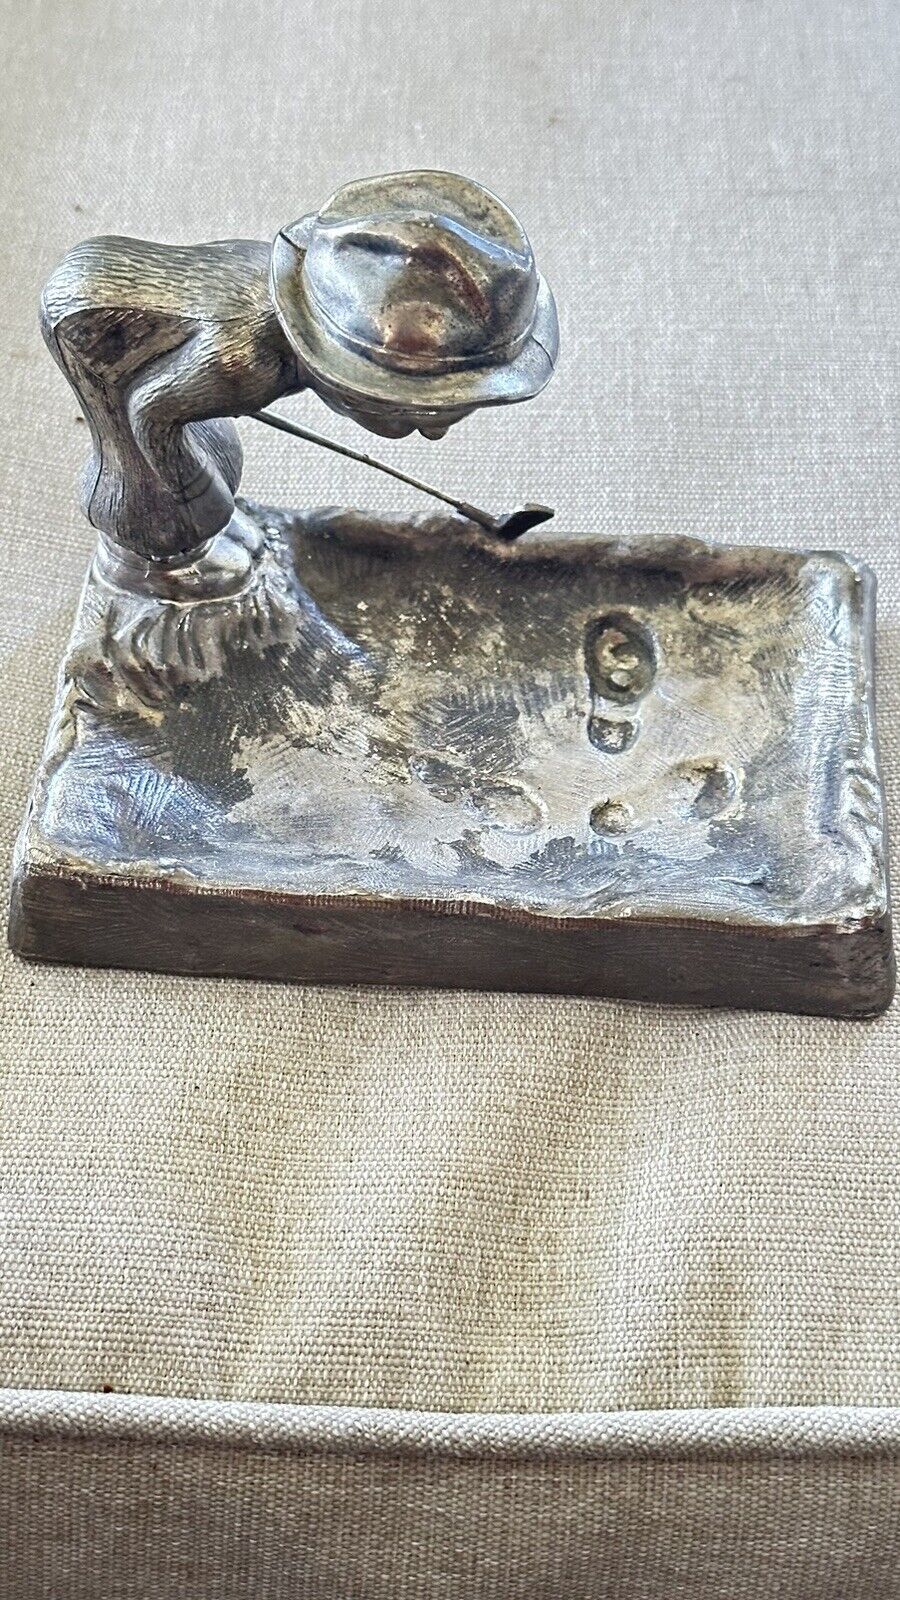 Silver / Pewter Golfer In Sand Trap Ashtray - Trinket Dish Vintage 1950’s Signed